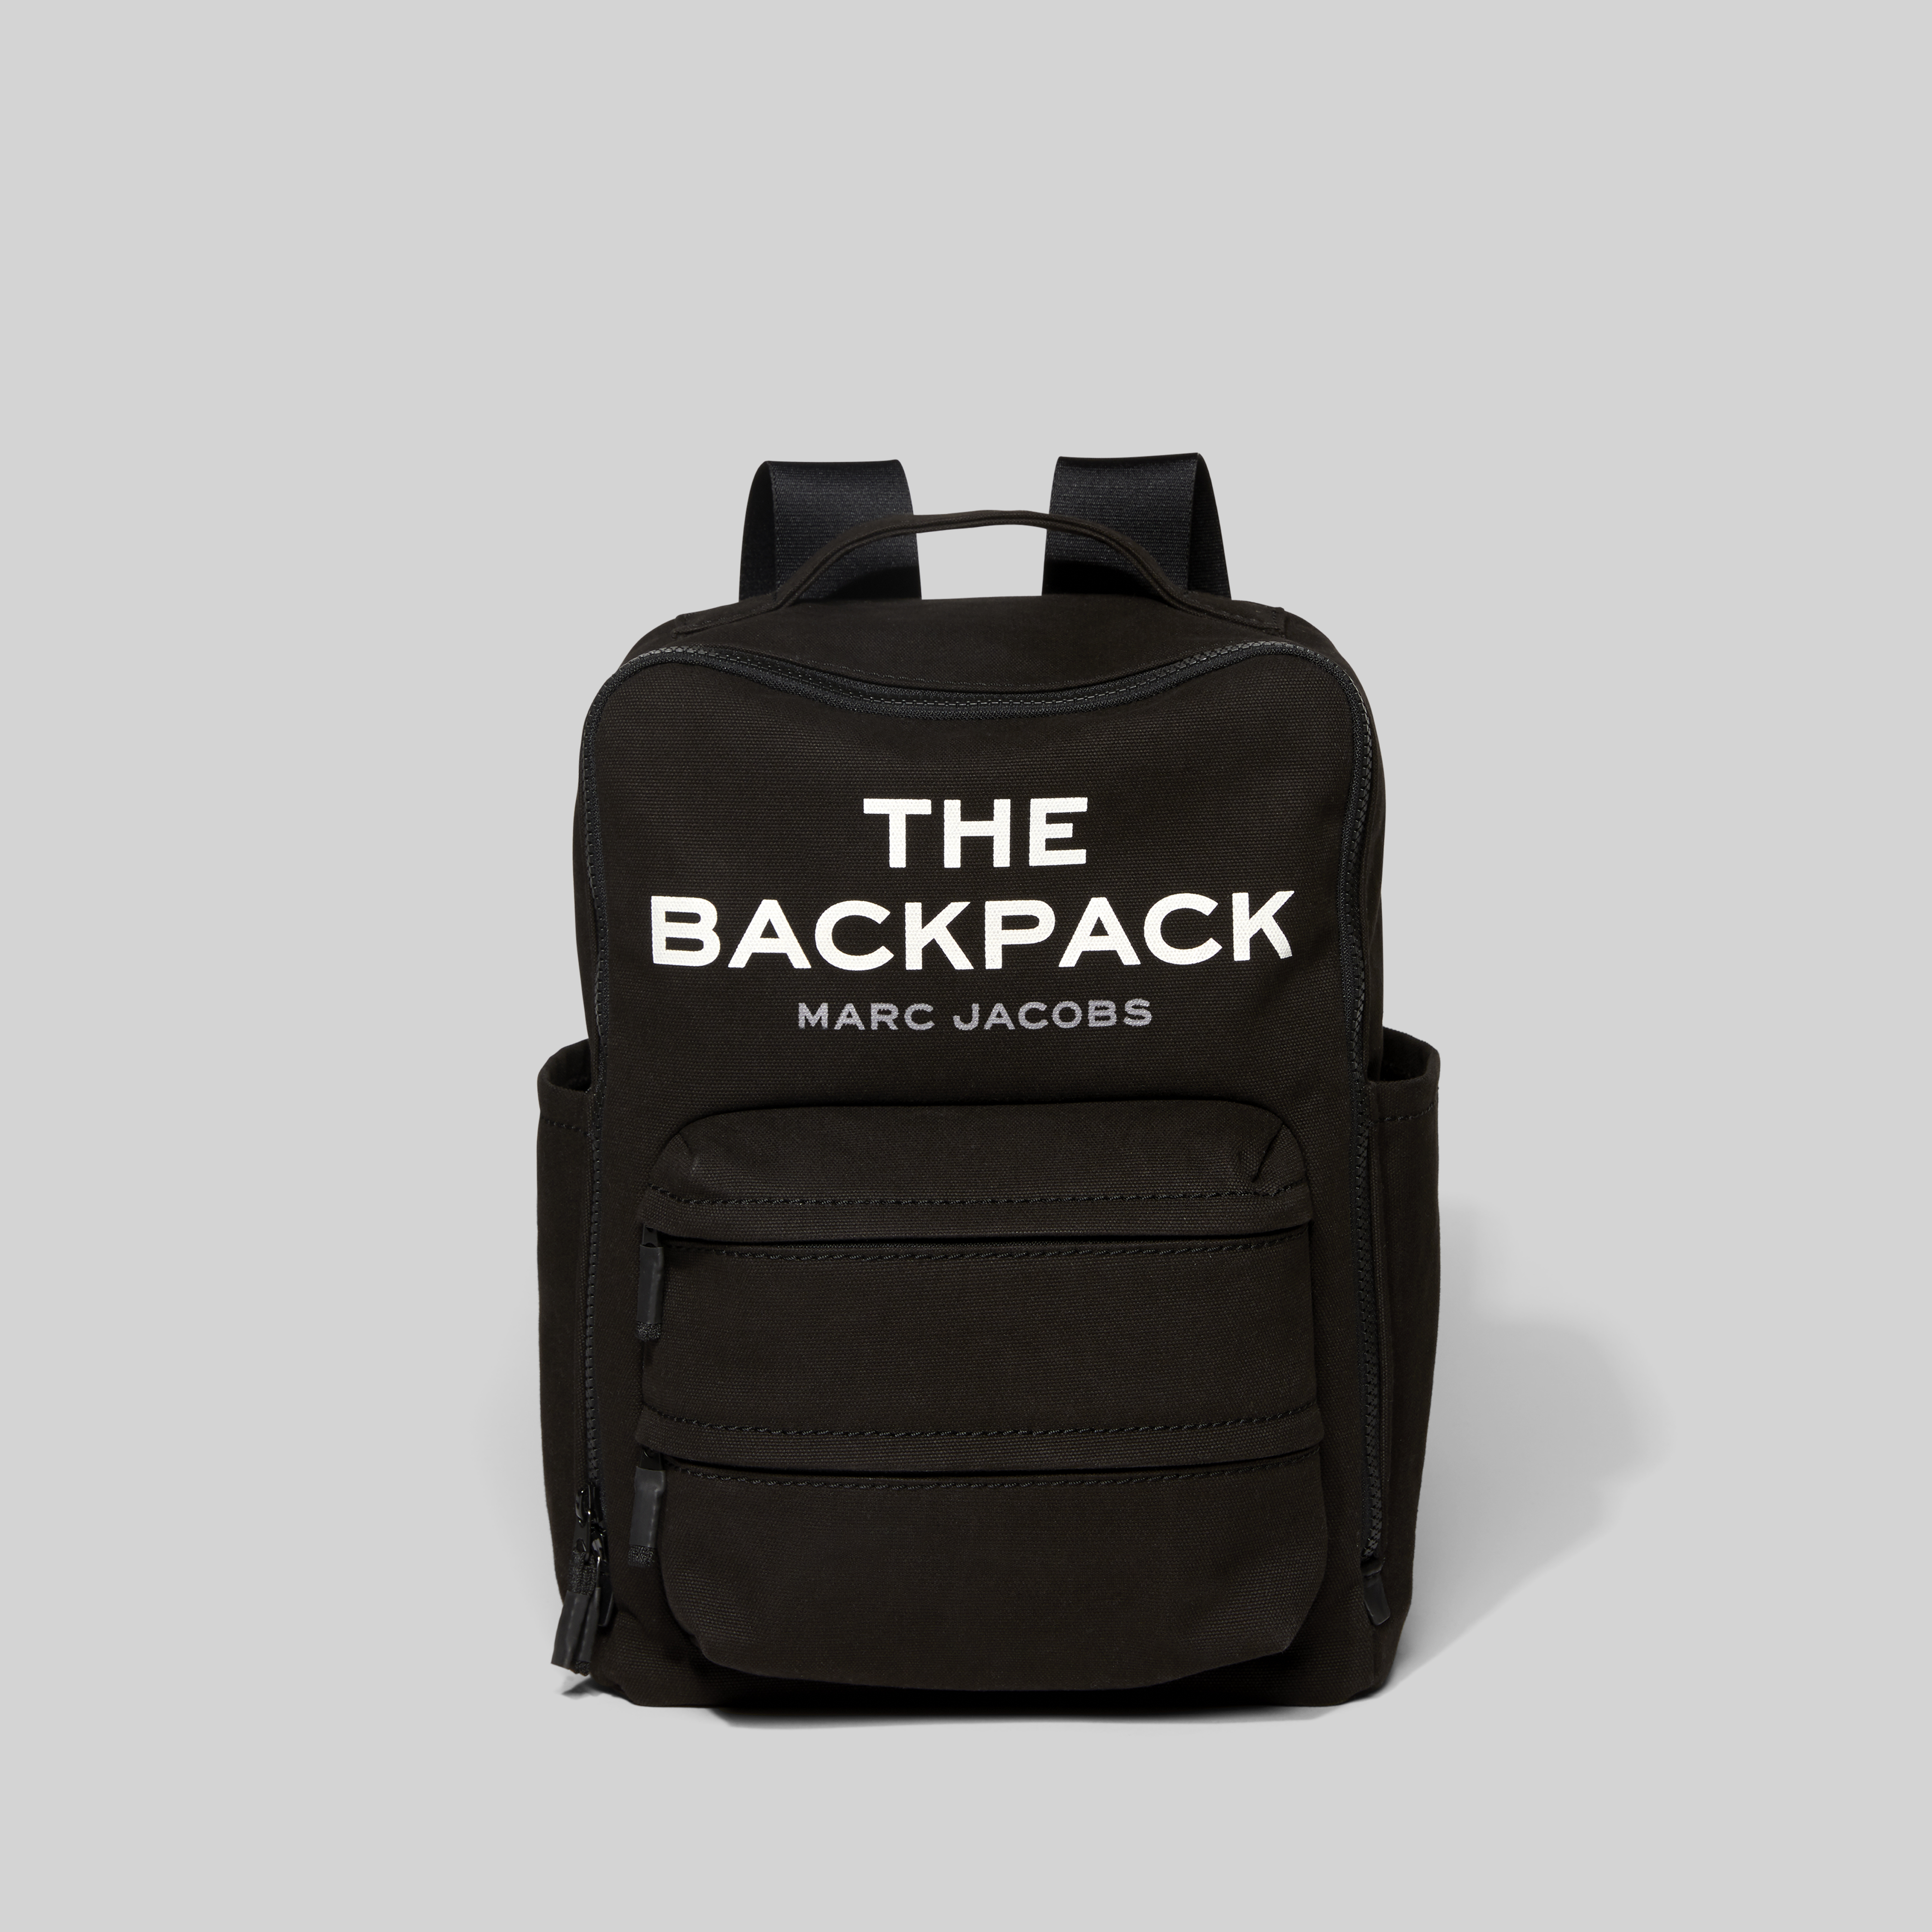  The Backpack